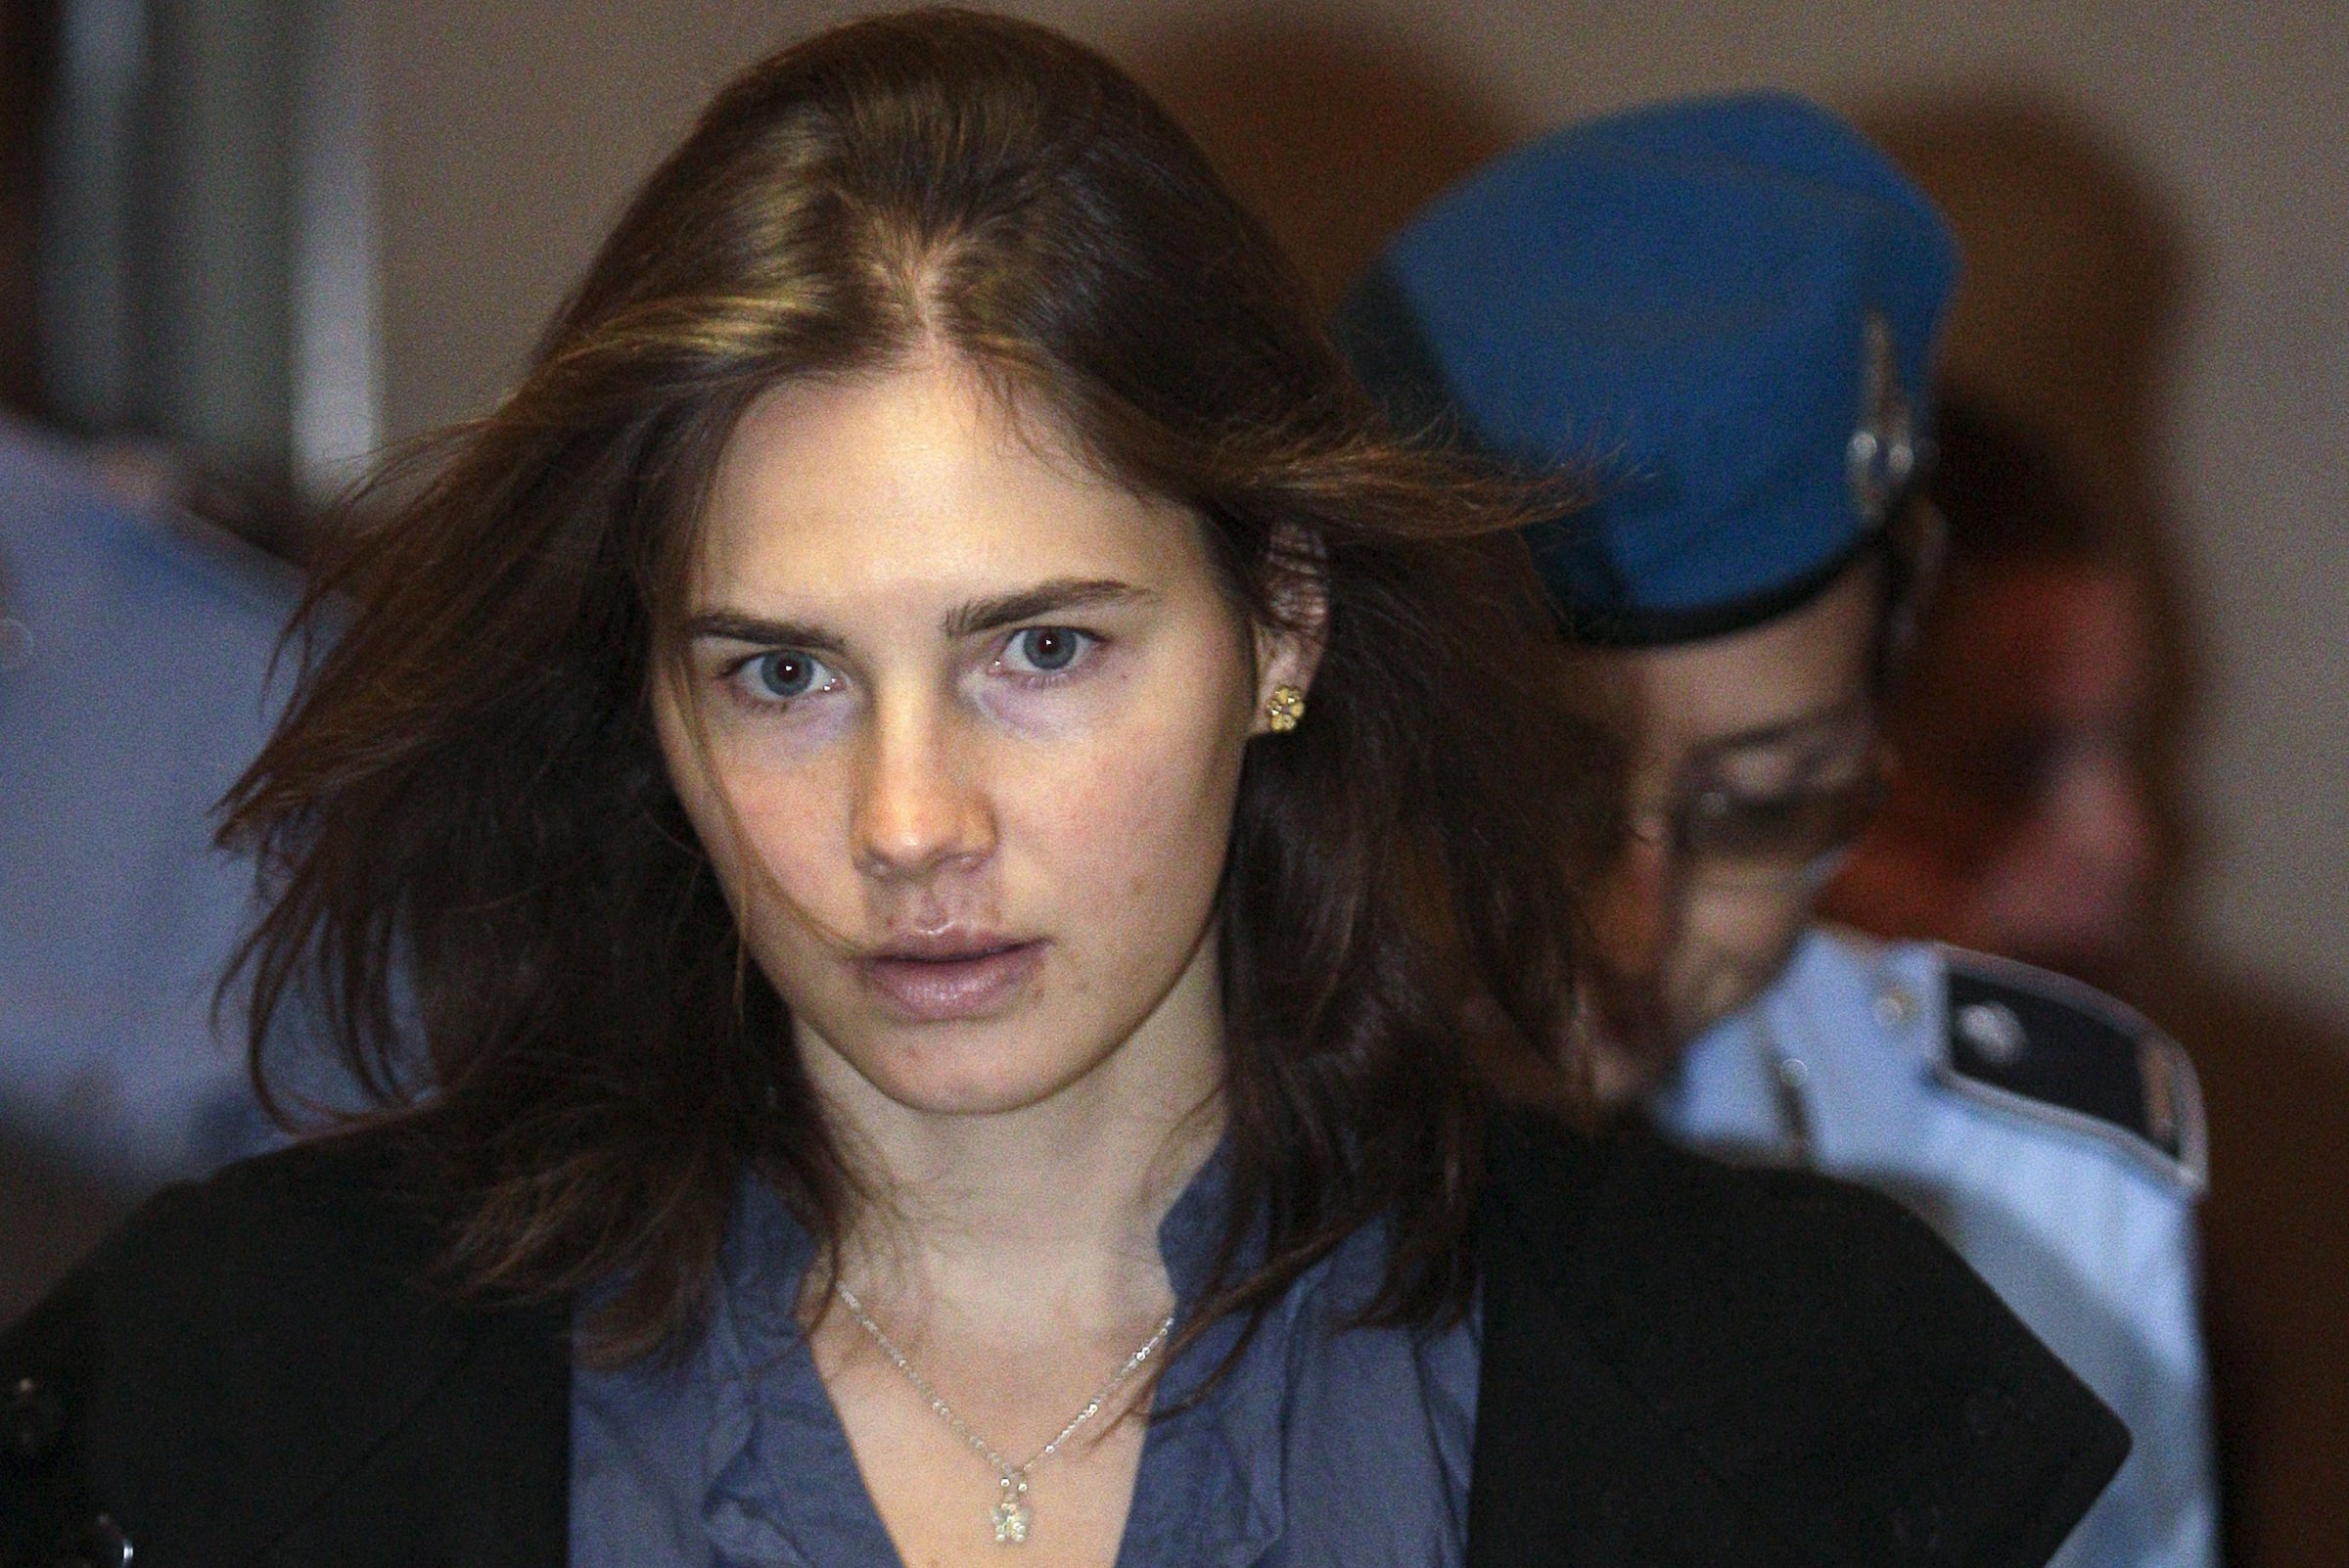 File photo of Knox, the U.S. student convicted of murdering her British flatmate in Italy in November 2007, arriving at the court during her appeal trial session in Perugia